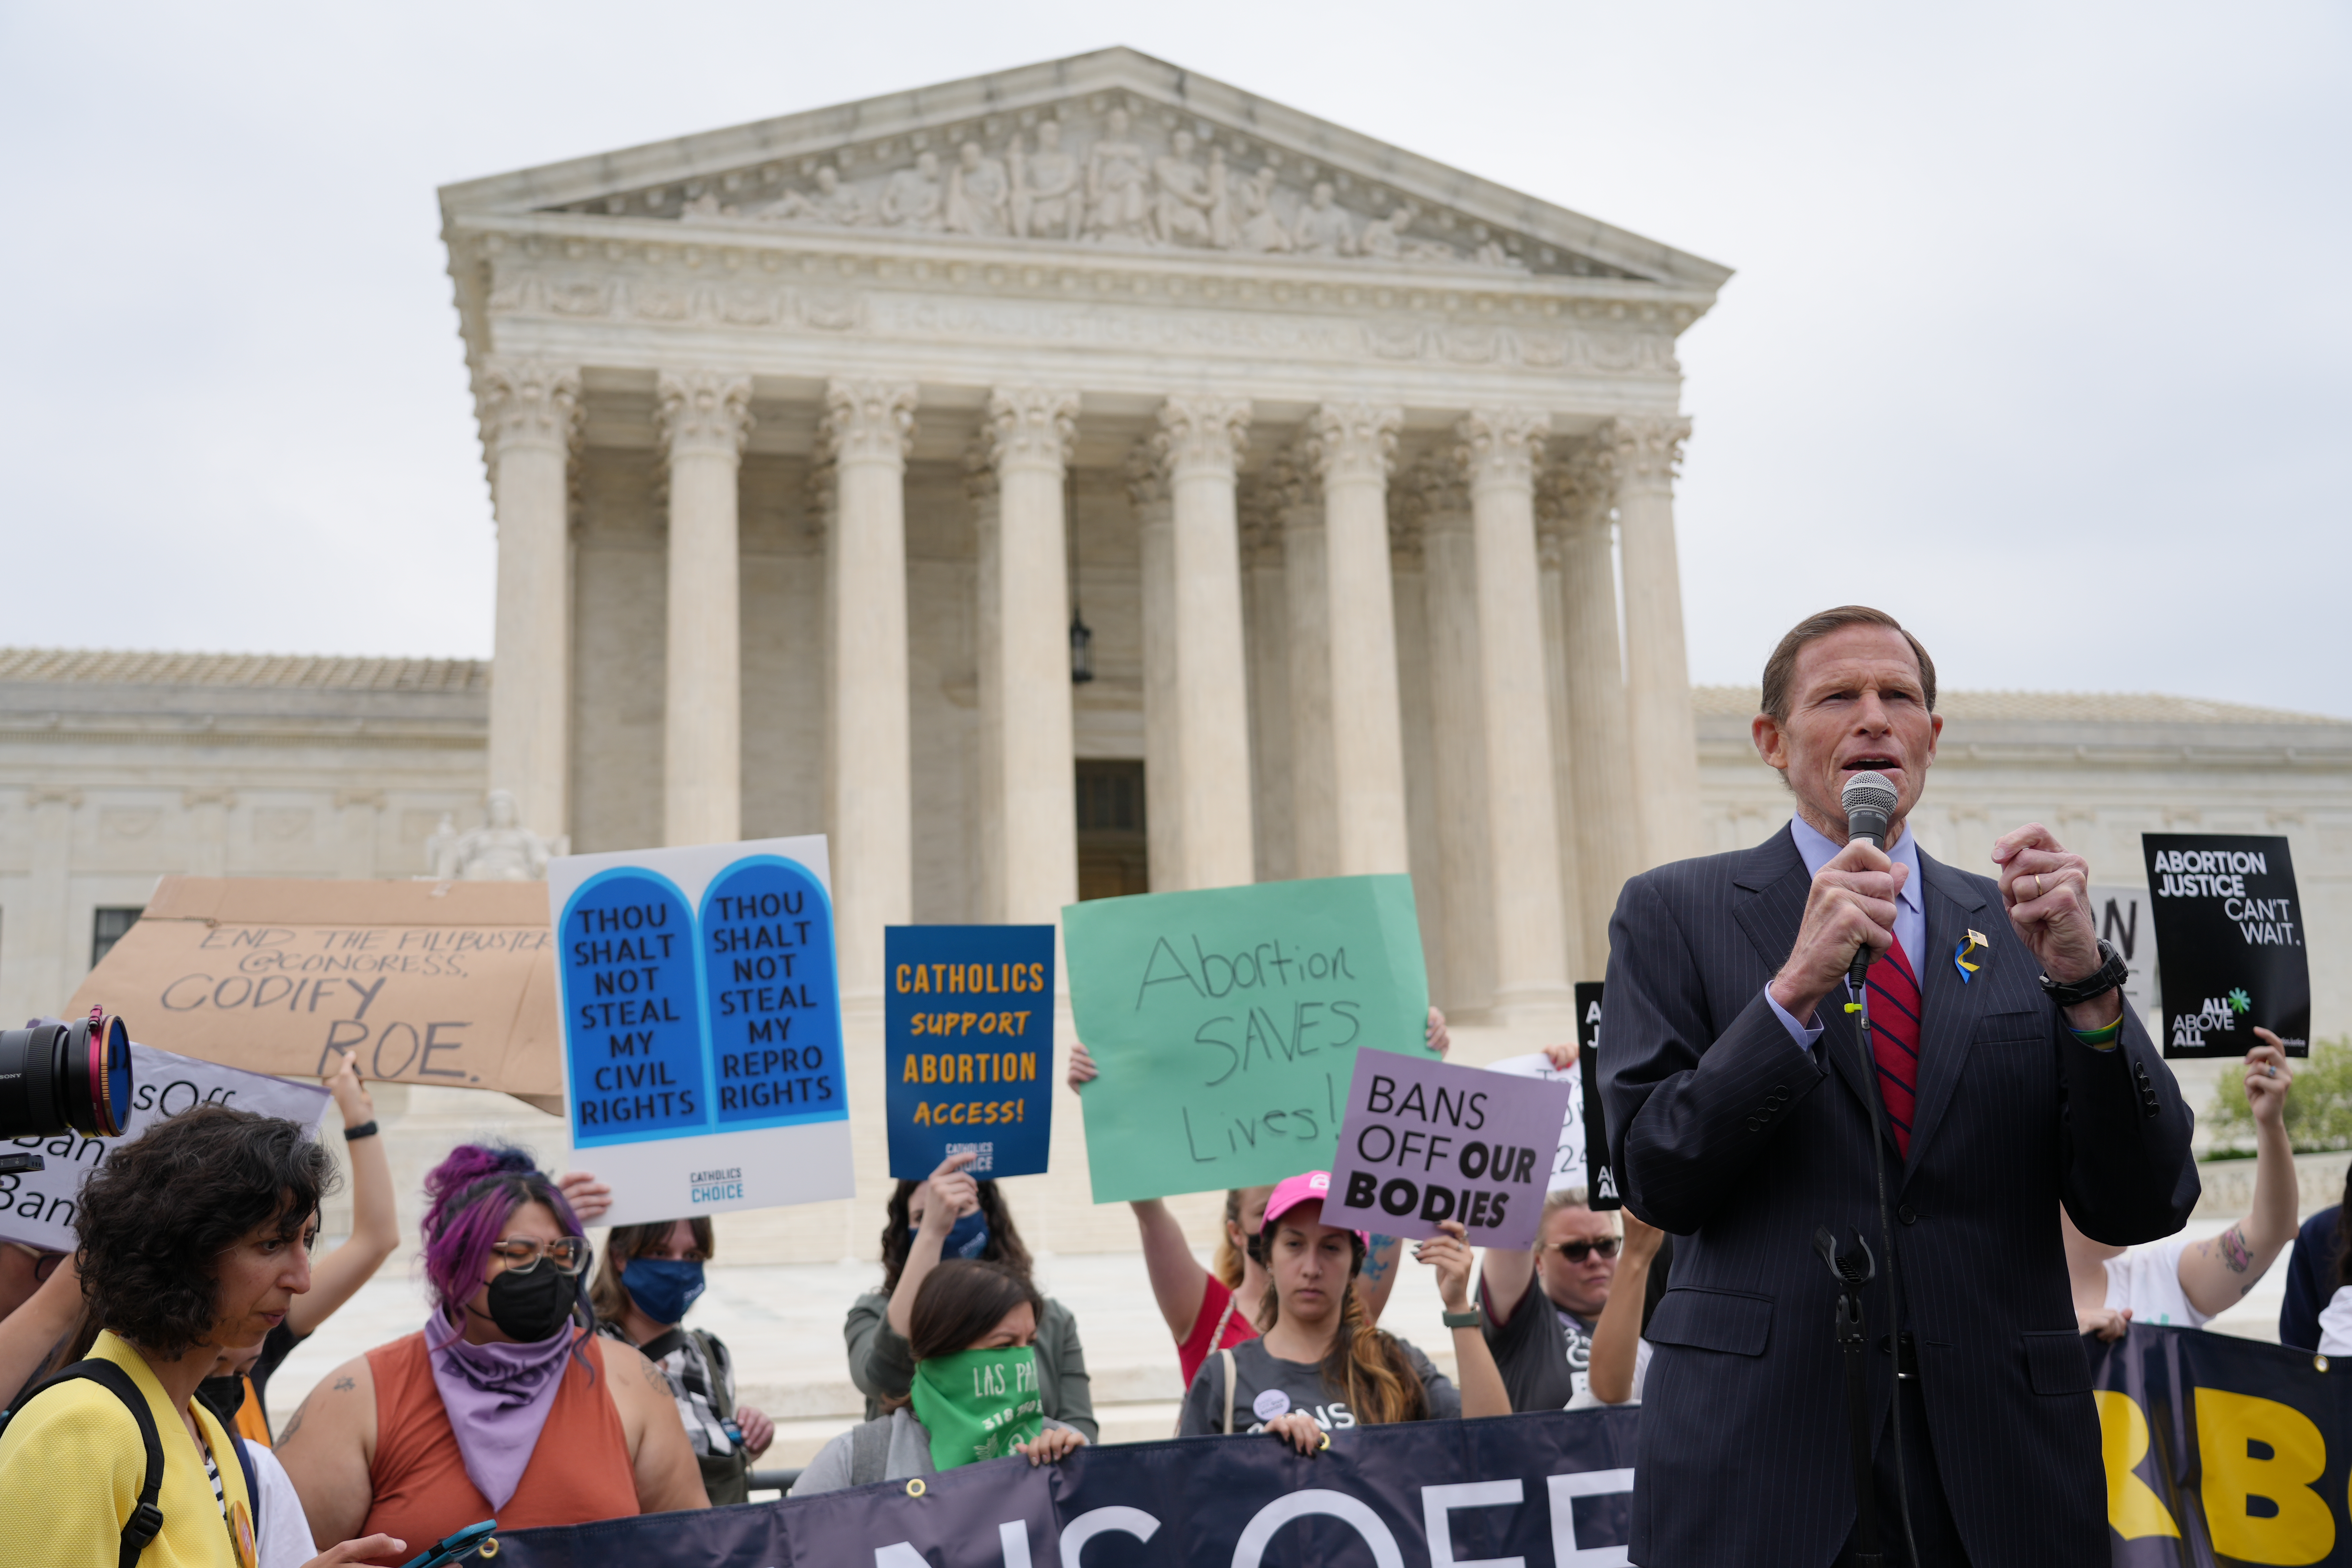 U.S. Senator Richard Blumenthal (D-CT) reacted to a reported draft Supreme Court opinion overturning Roe v. Wade and its fifty years of precedent protecting access to abortion. 